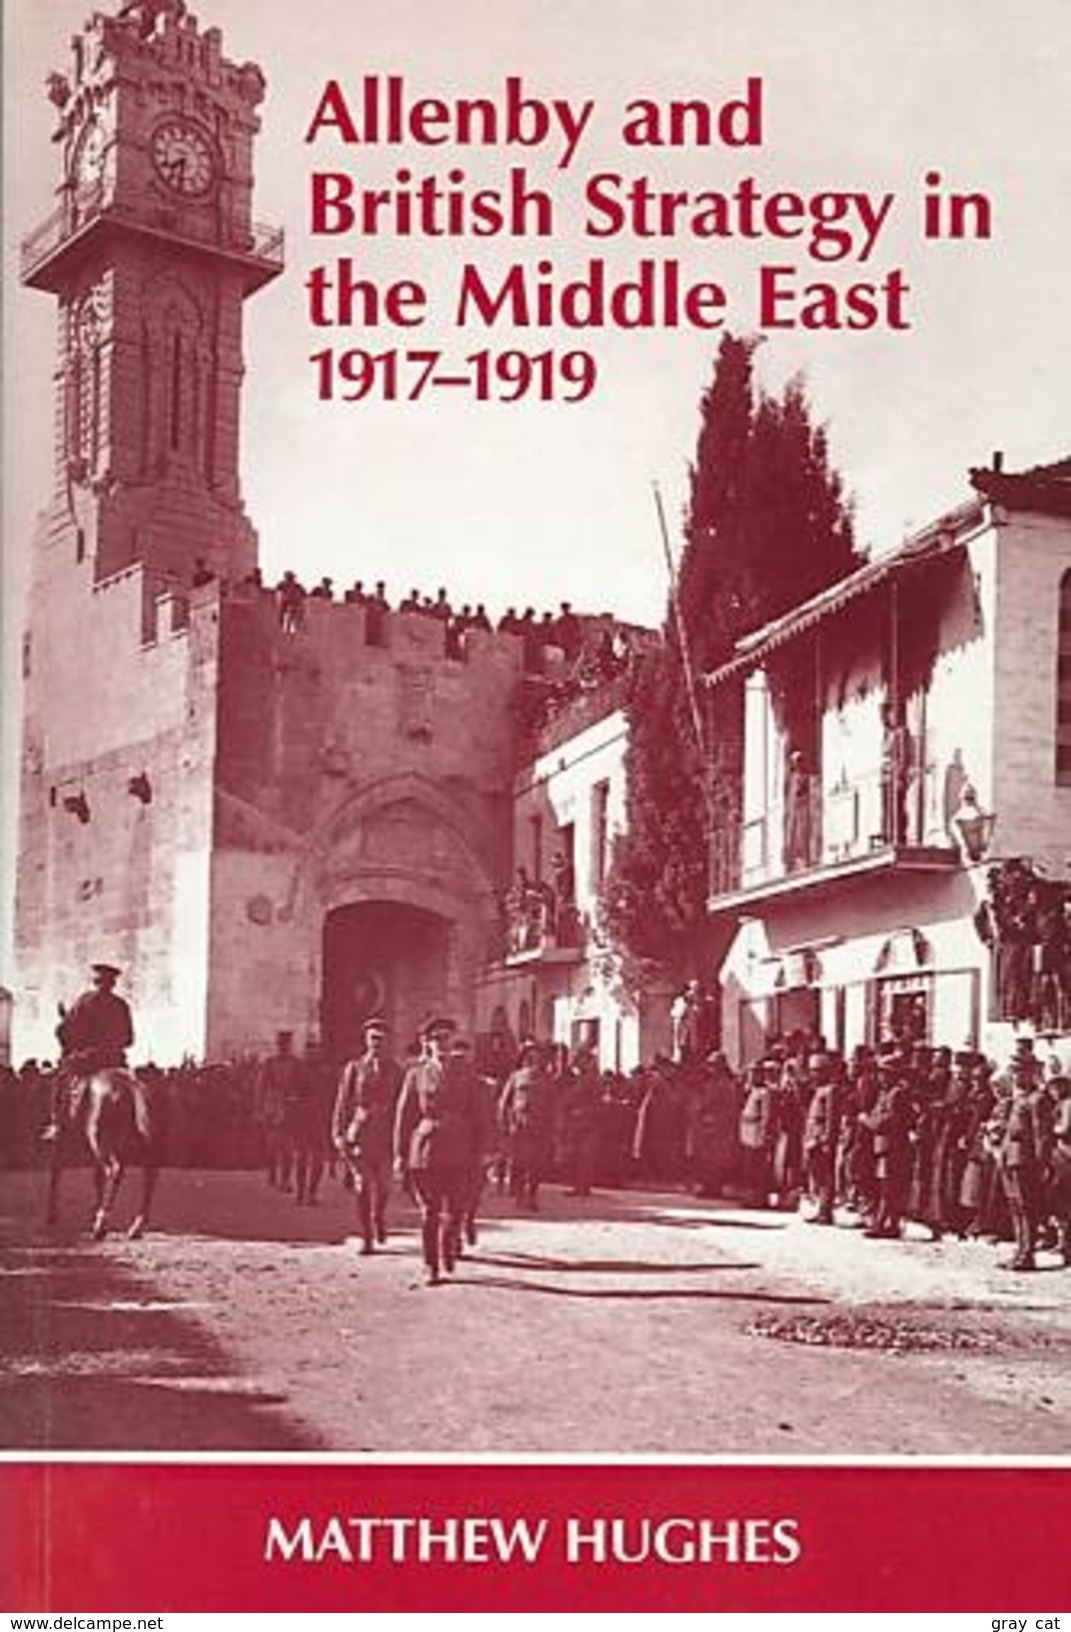 Allenby And British Strategy In The Middle East, 1917-1919 By Matthew Hughes (ISBN 9780714649207) - Medio Oriente